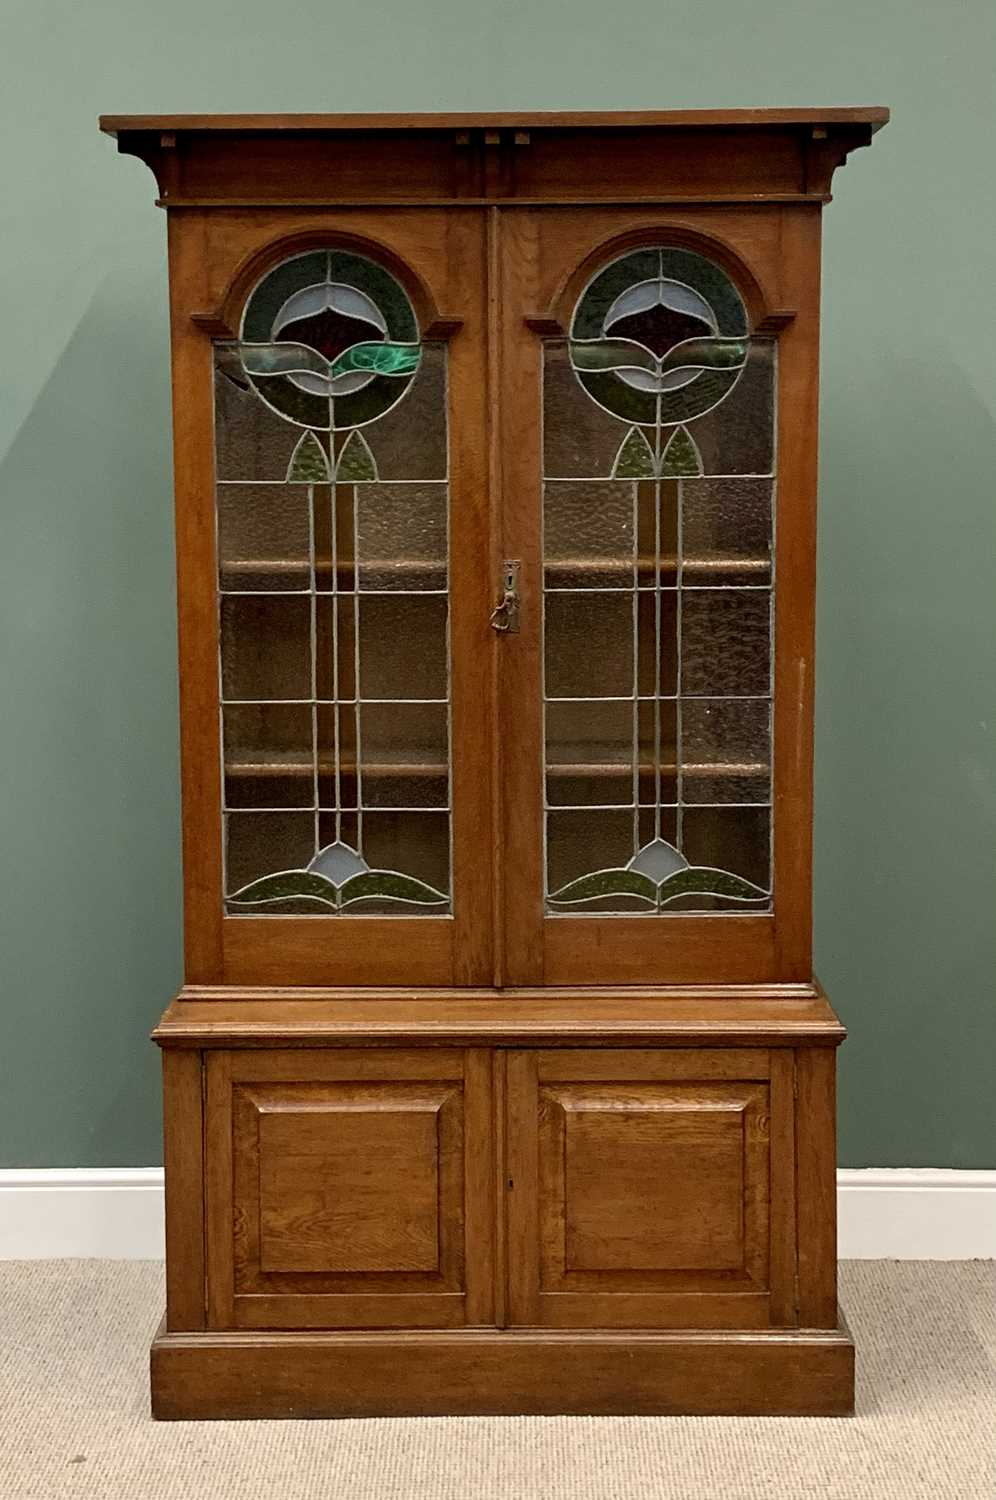 ARTS & CRAFTS STYLE OAK BOOKCASE CUPBOARD, the upper section with twin leaded and colour stained